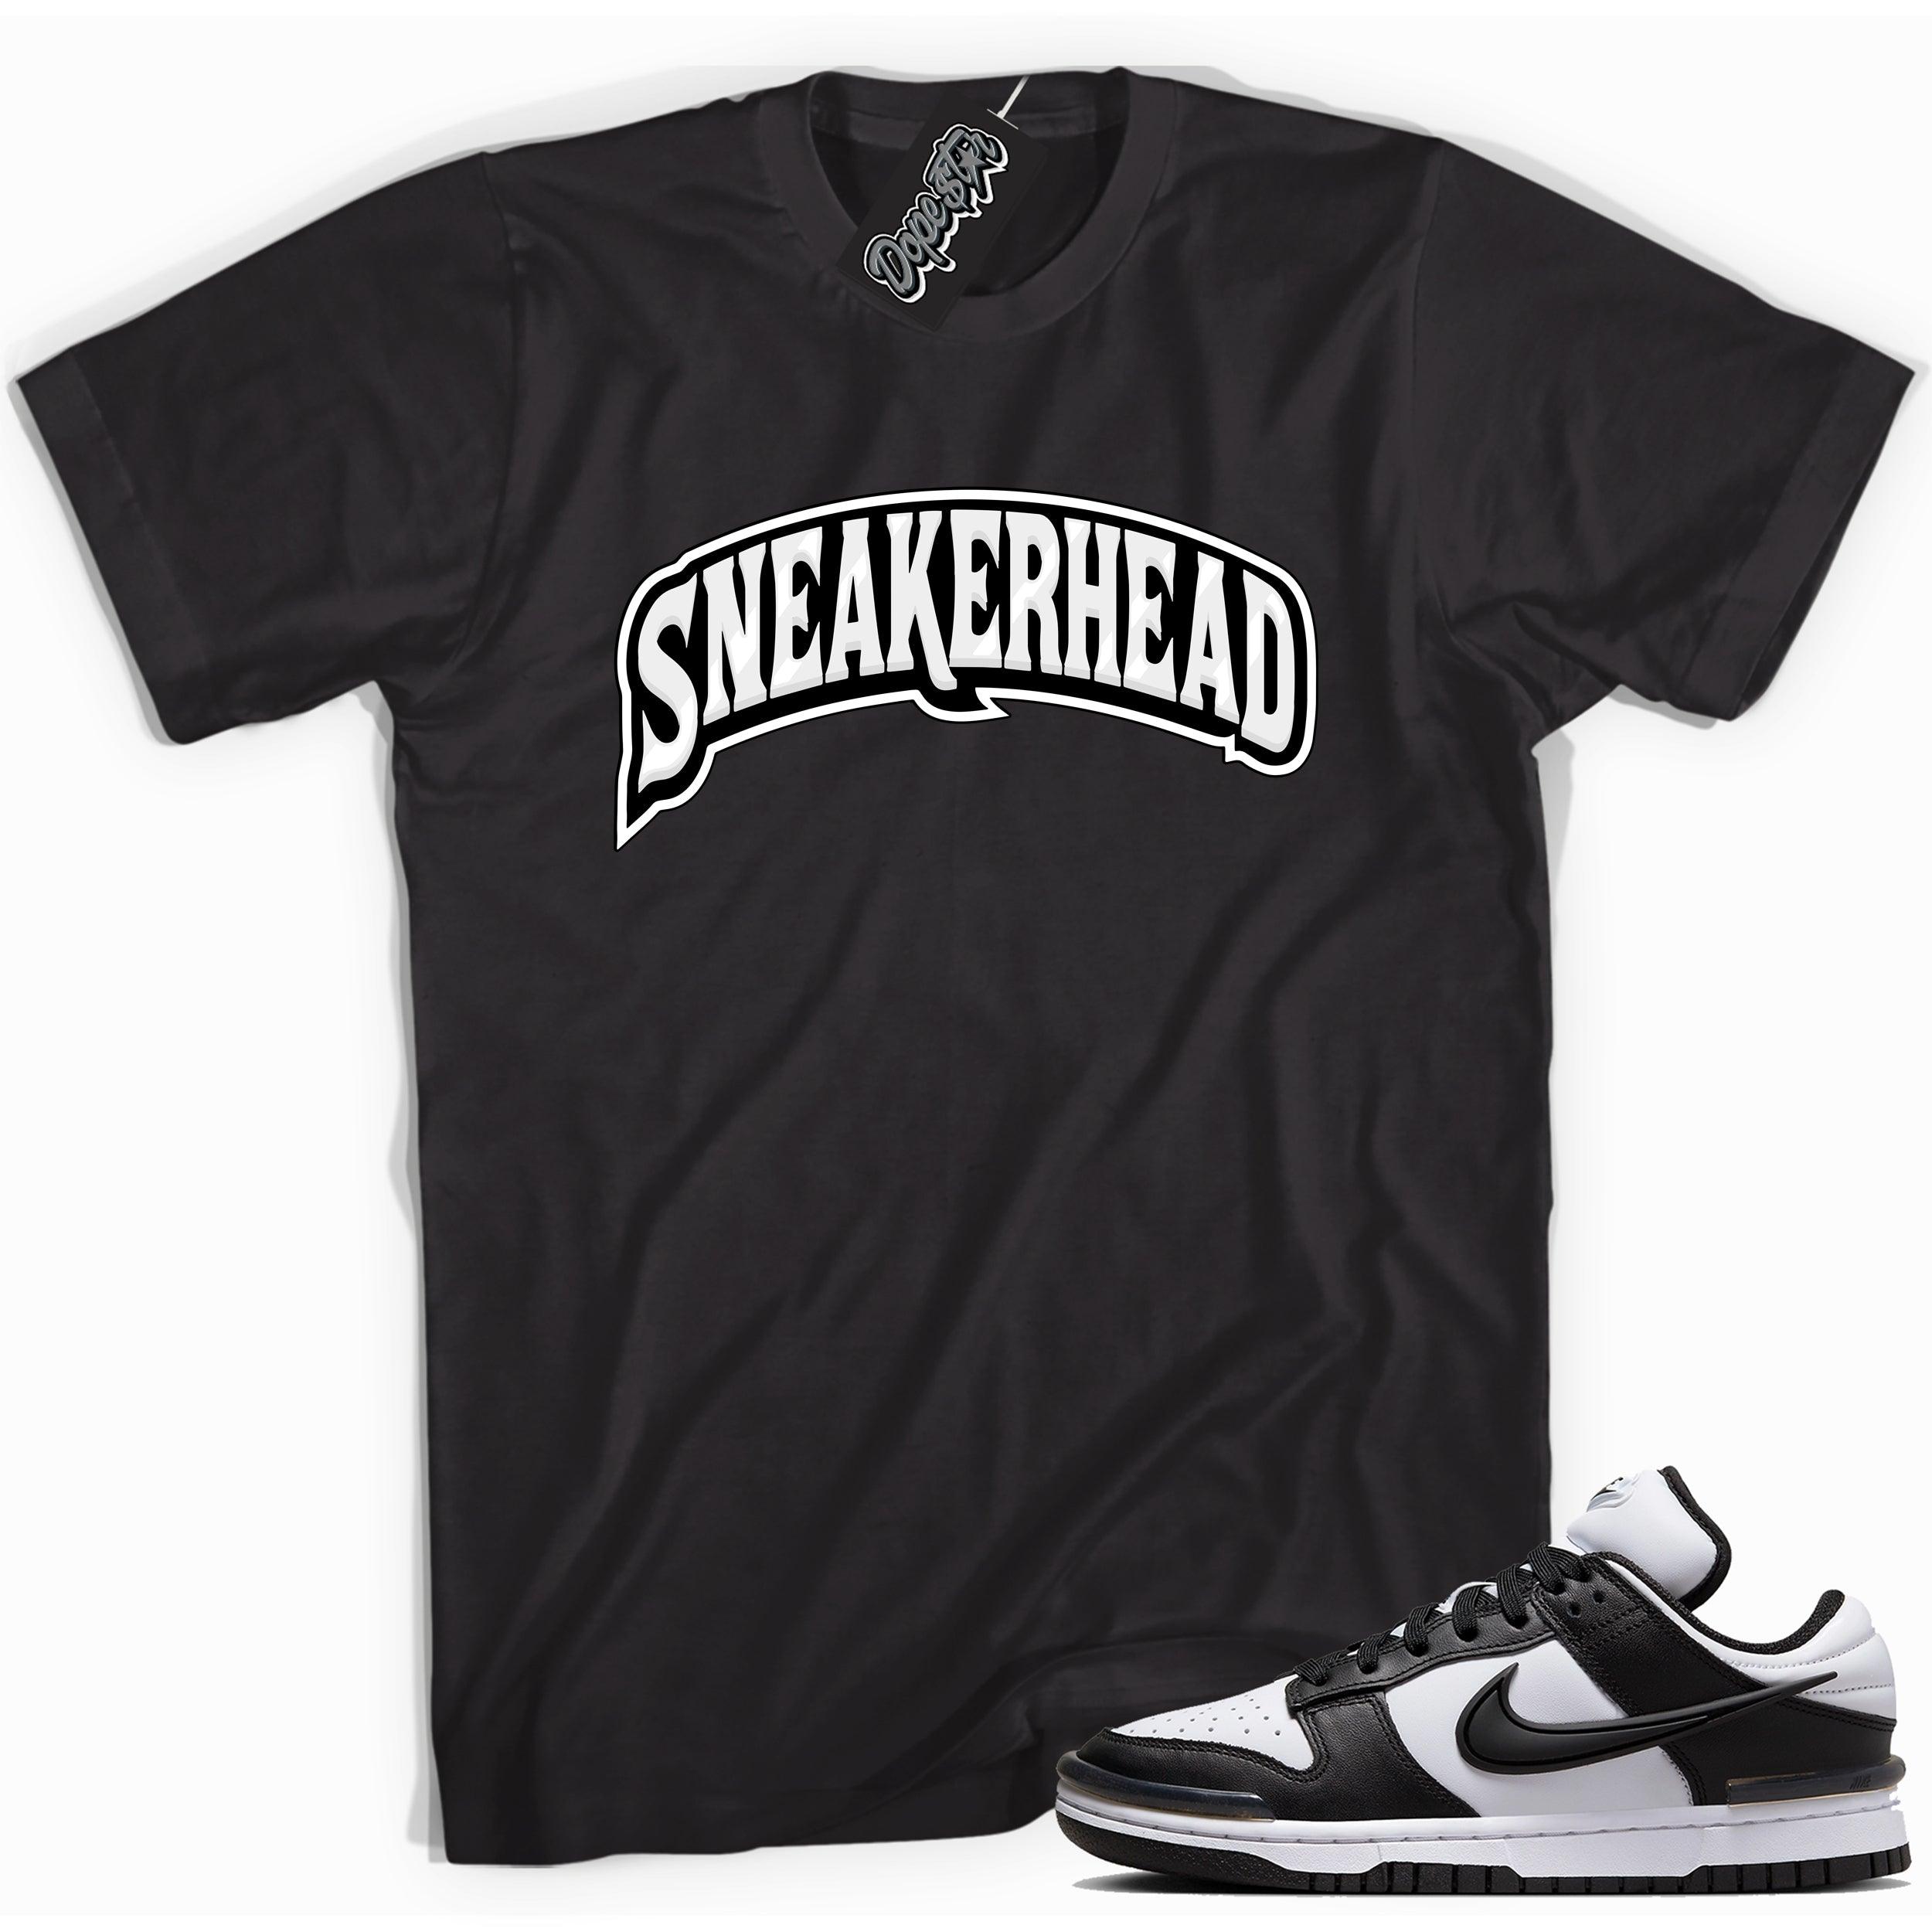 Cool black graphic tee with 'sneakerhead' print, that perfectly matches Nike Dunk Low Twist Panda sneakers.